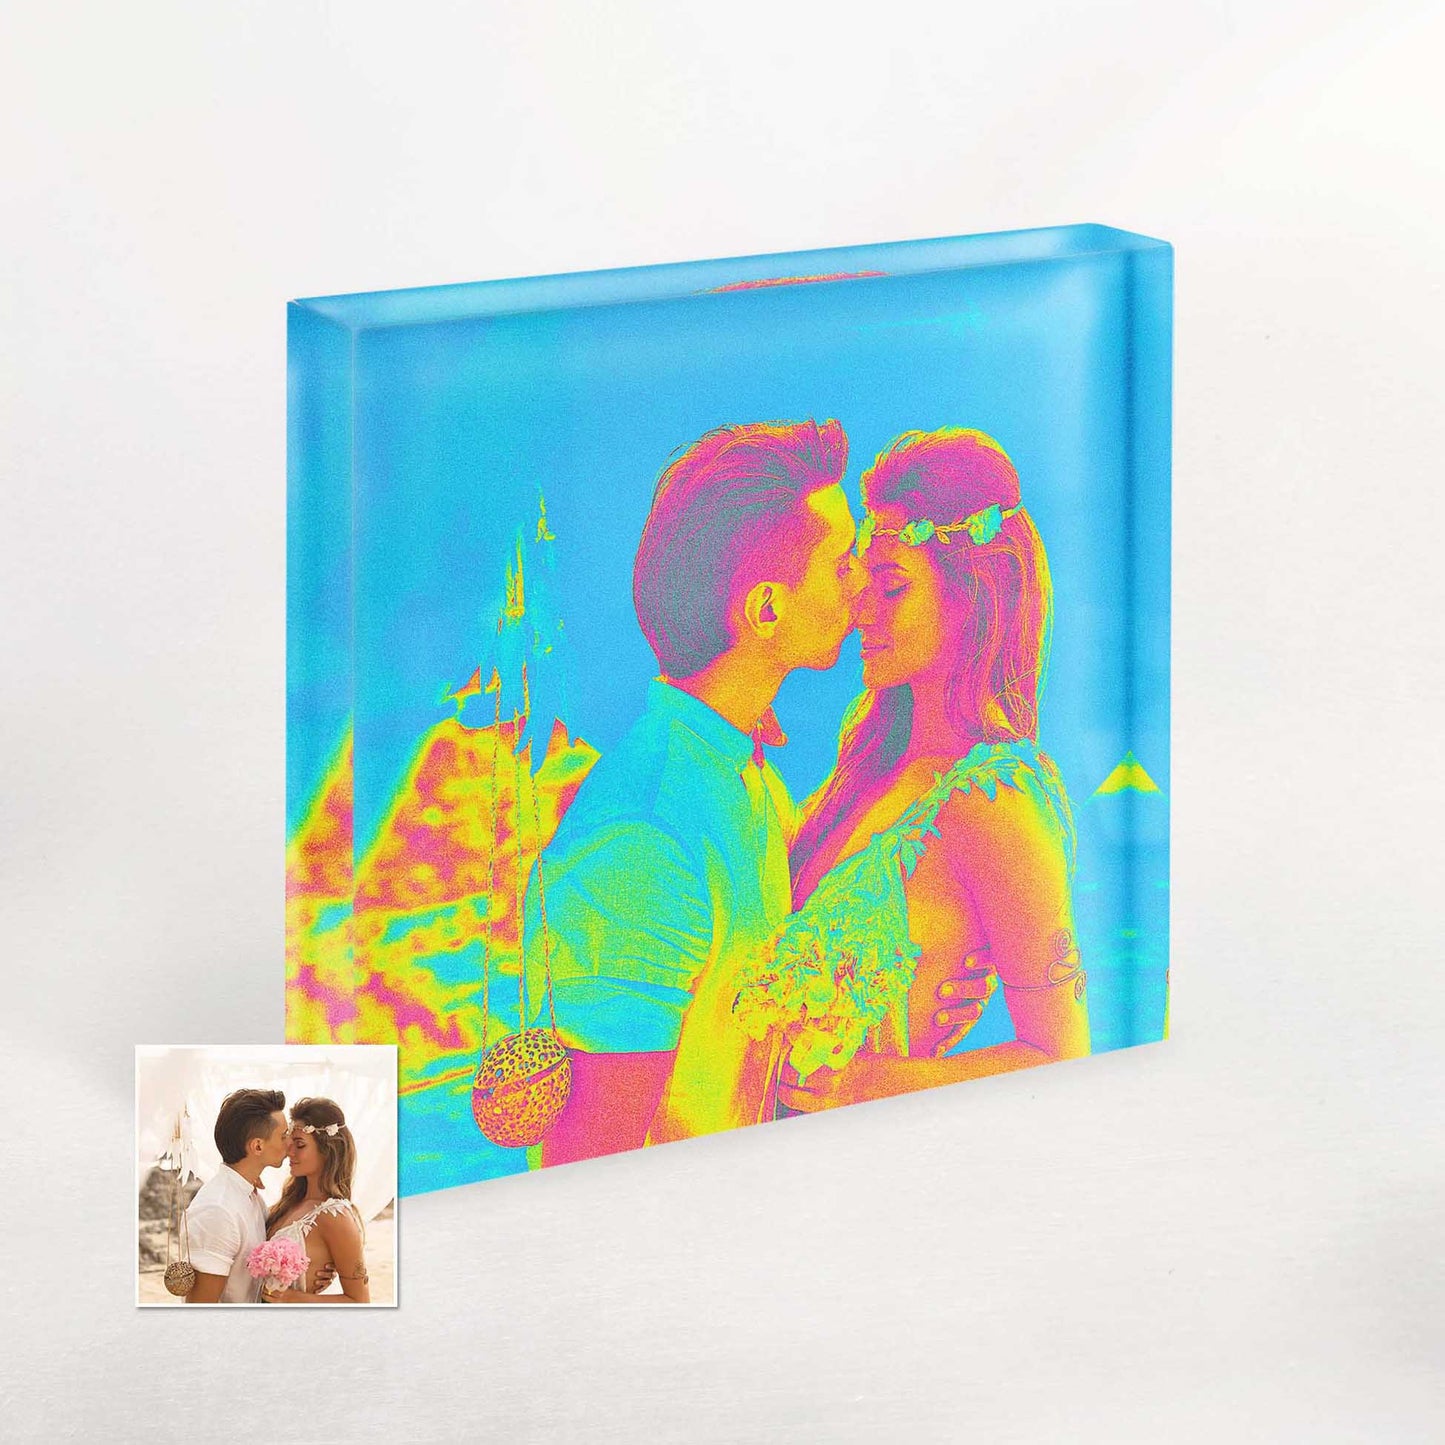 Unleash your creativity with this personalised Acid Trip Effect Acrylic Block Photo, customised from your photo. The vivid and eclectic color scheme creates a visually stunning piece that will capture attention and spark conversations